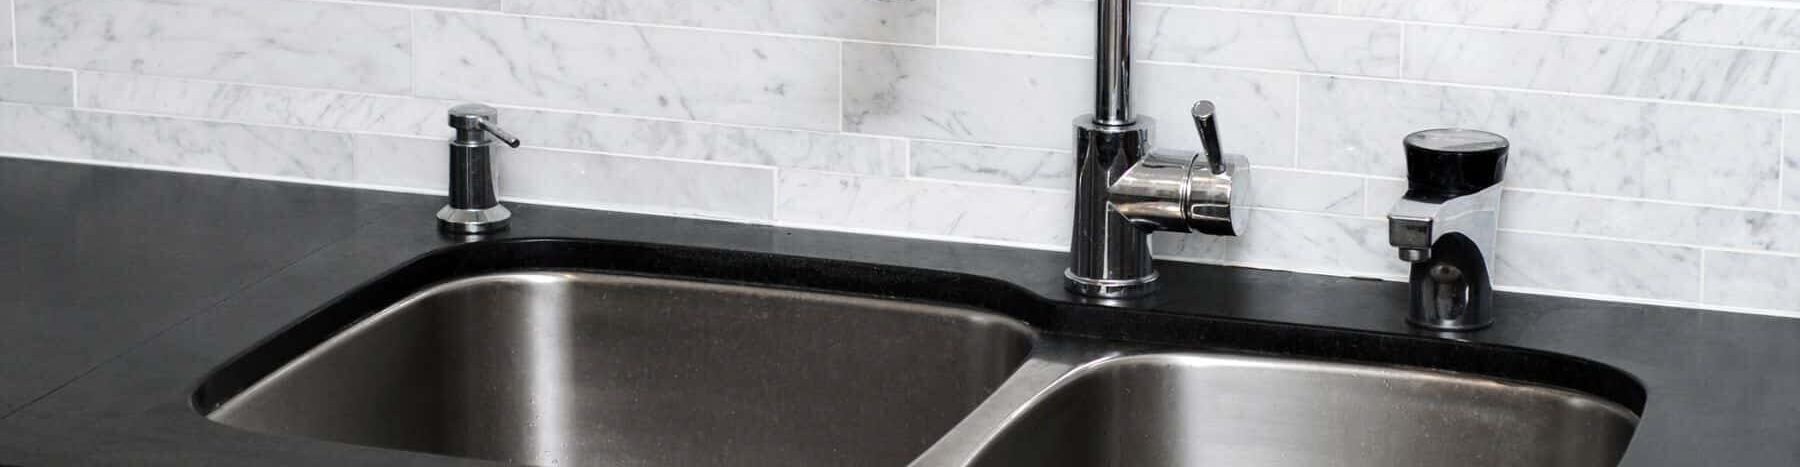 stainless steel kitchen sink with a black granite countertop